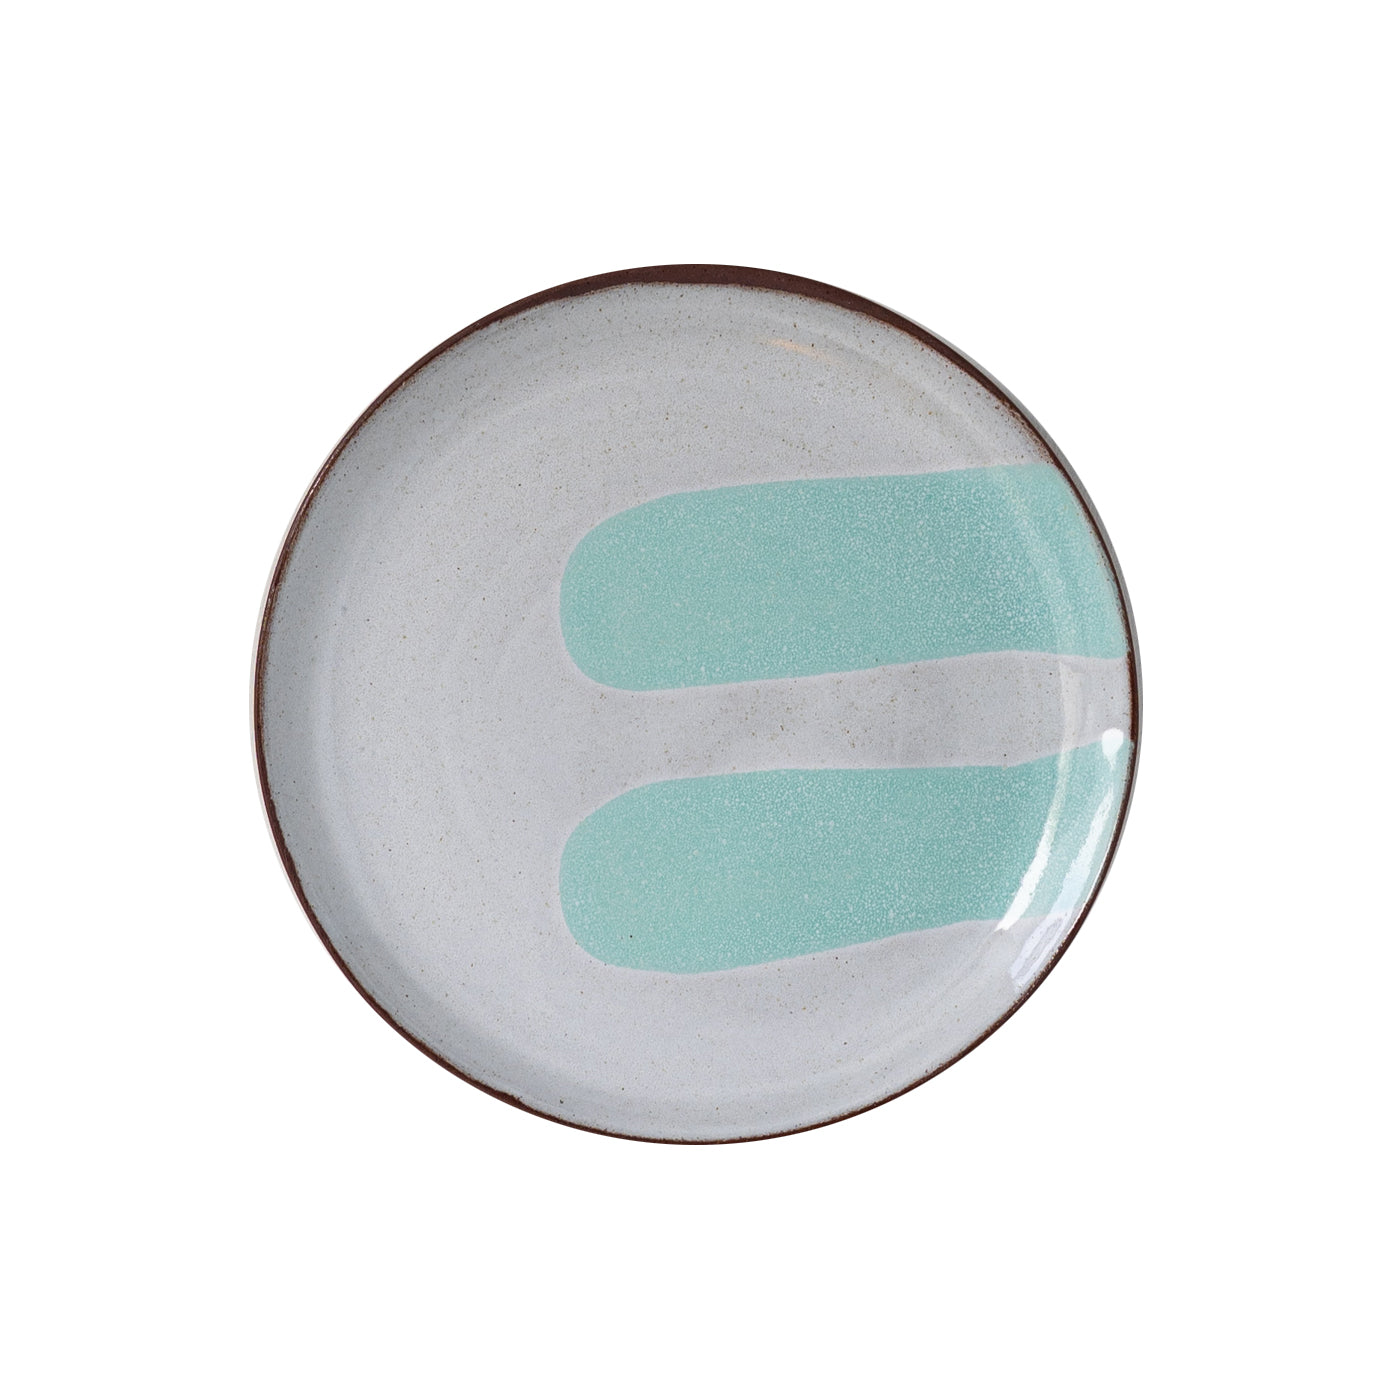 Silvia K hand made terracotta plate with white and 2 turquoise decor